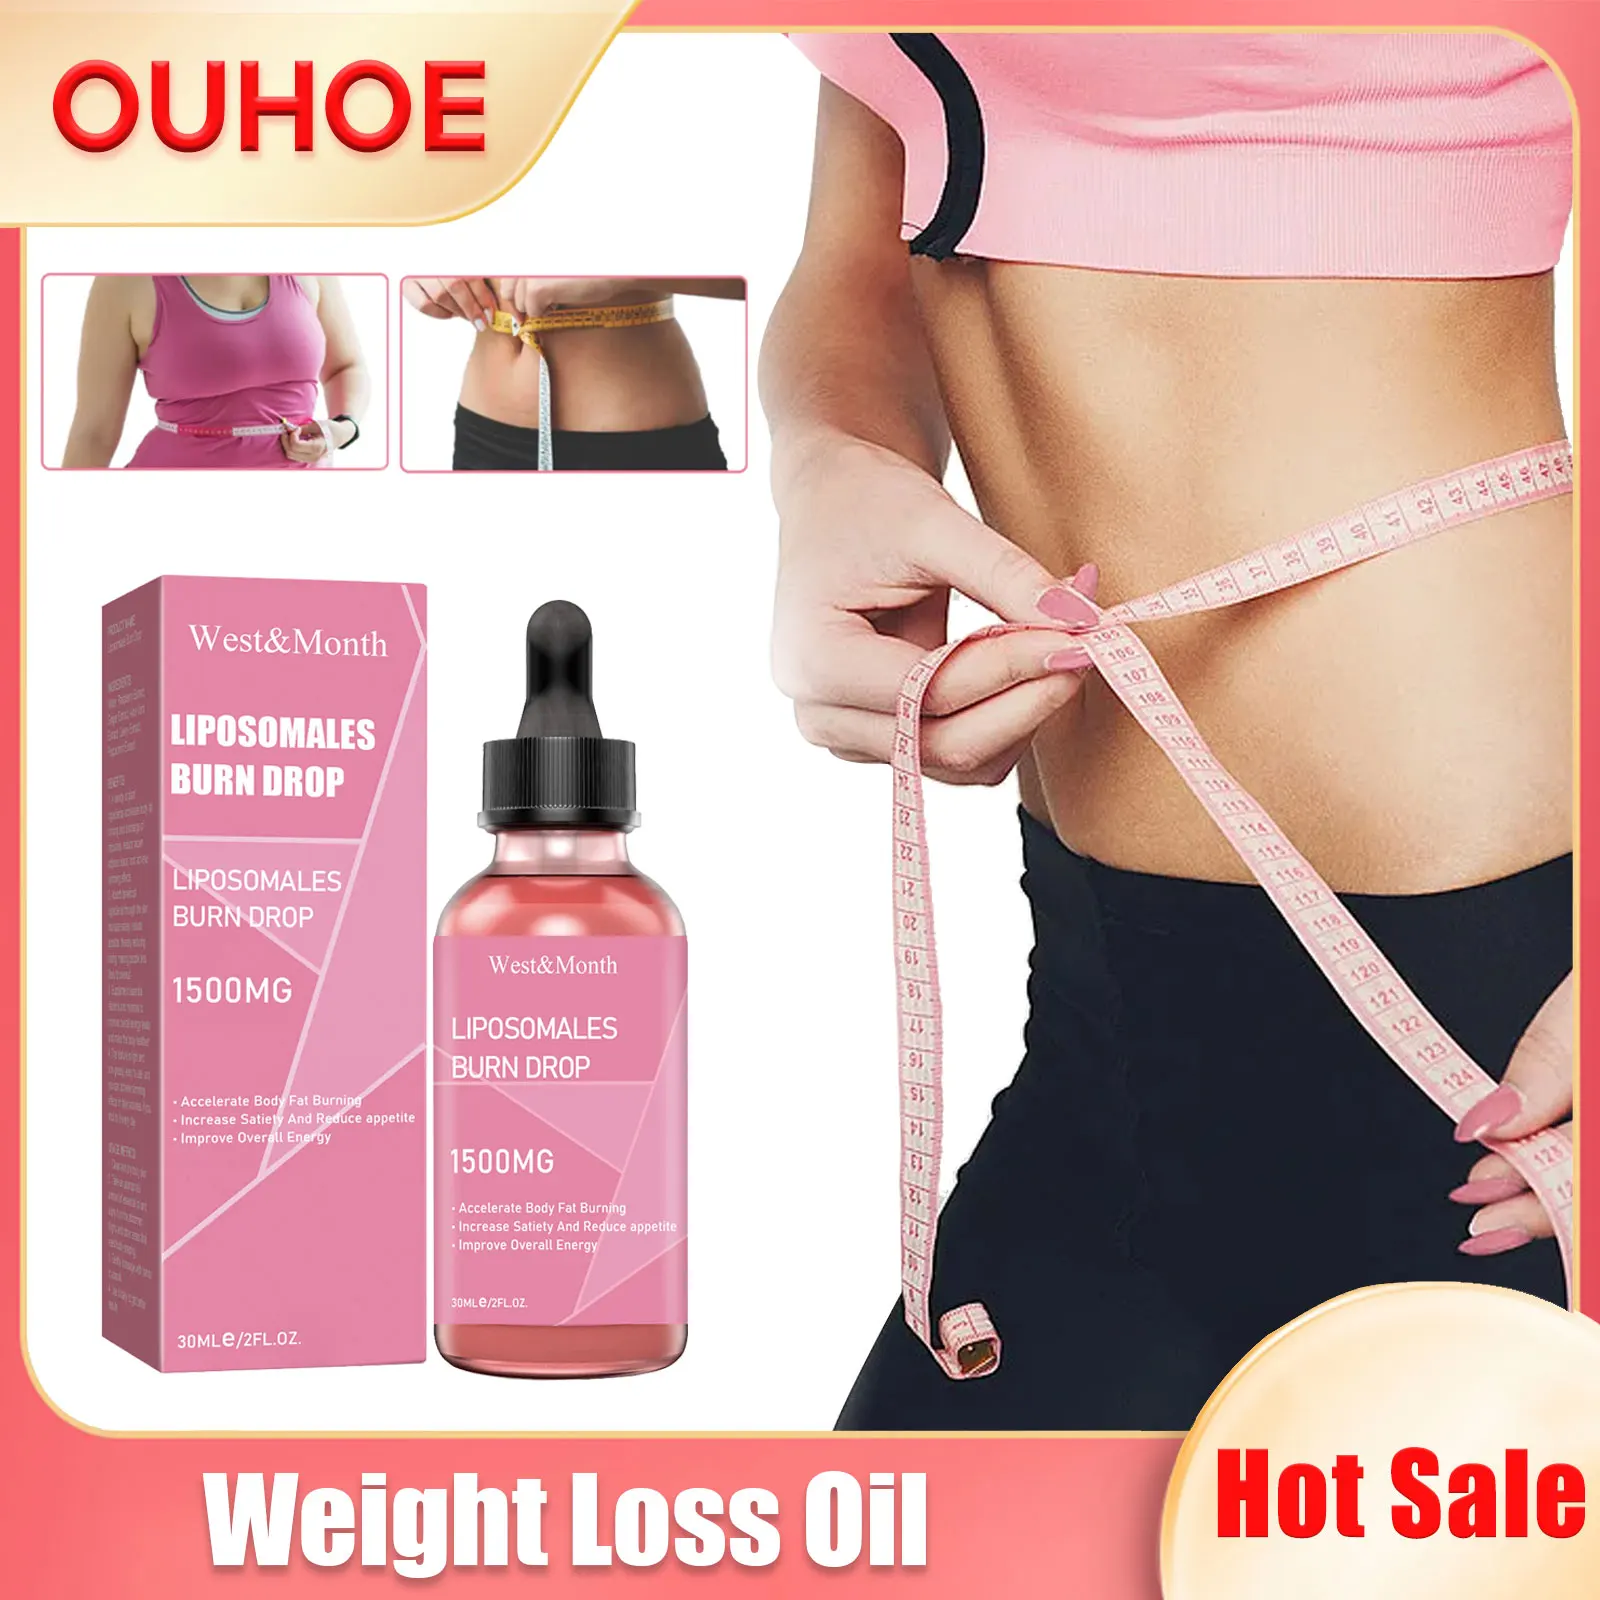 

Weight Loss Essential Oil Fat Burner Anti Cellulite Thin Arm Leg Waist Belly Body Shaping Tightening Dissolve Fat Slimming Drops